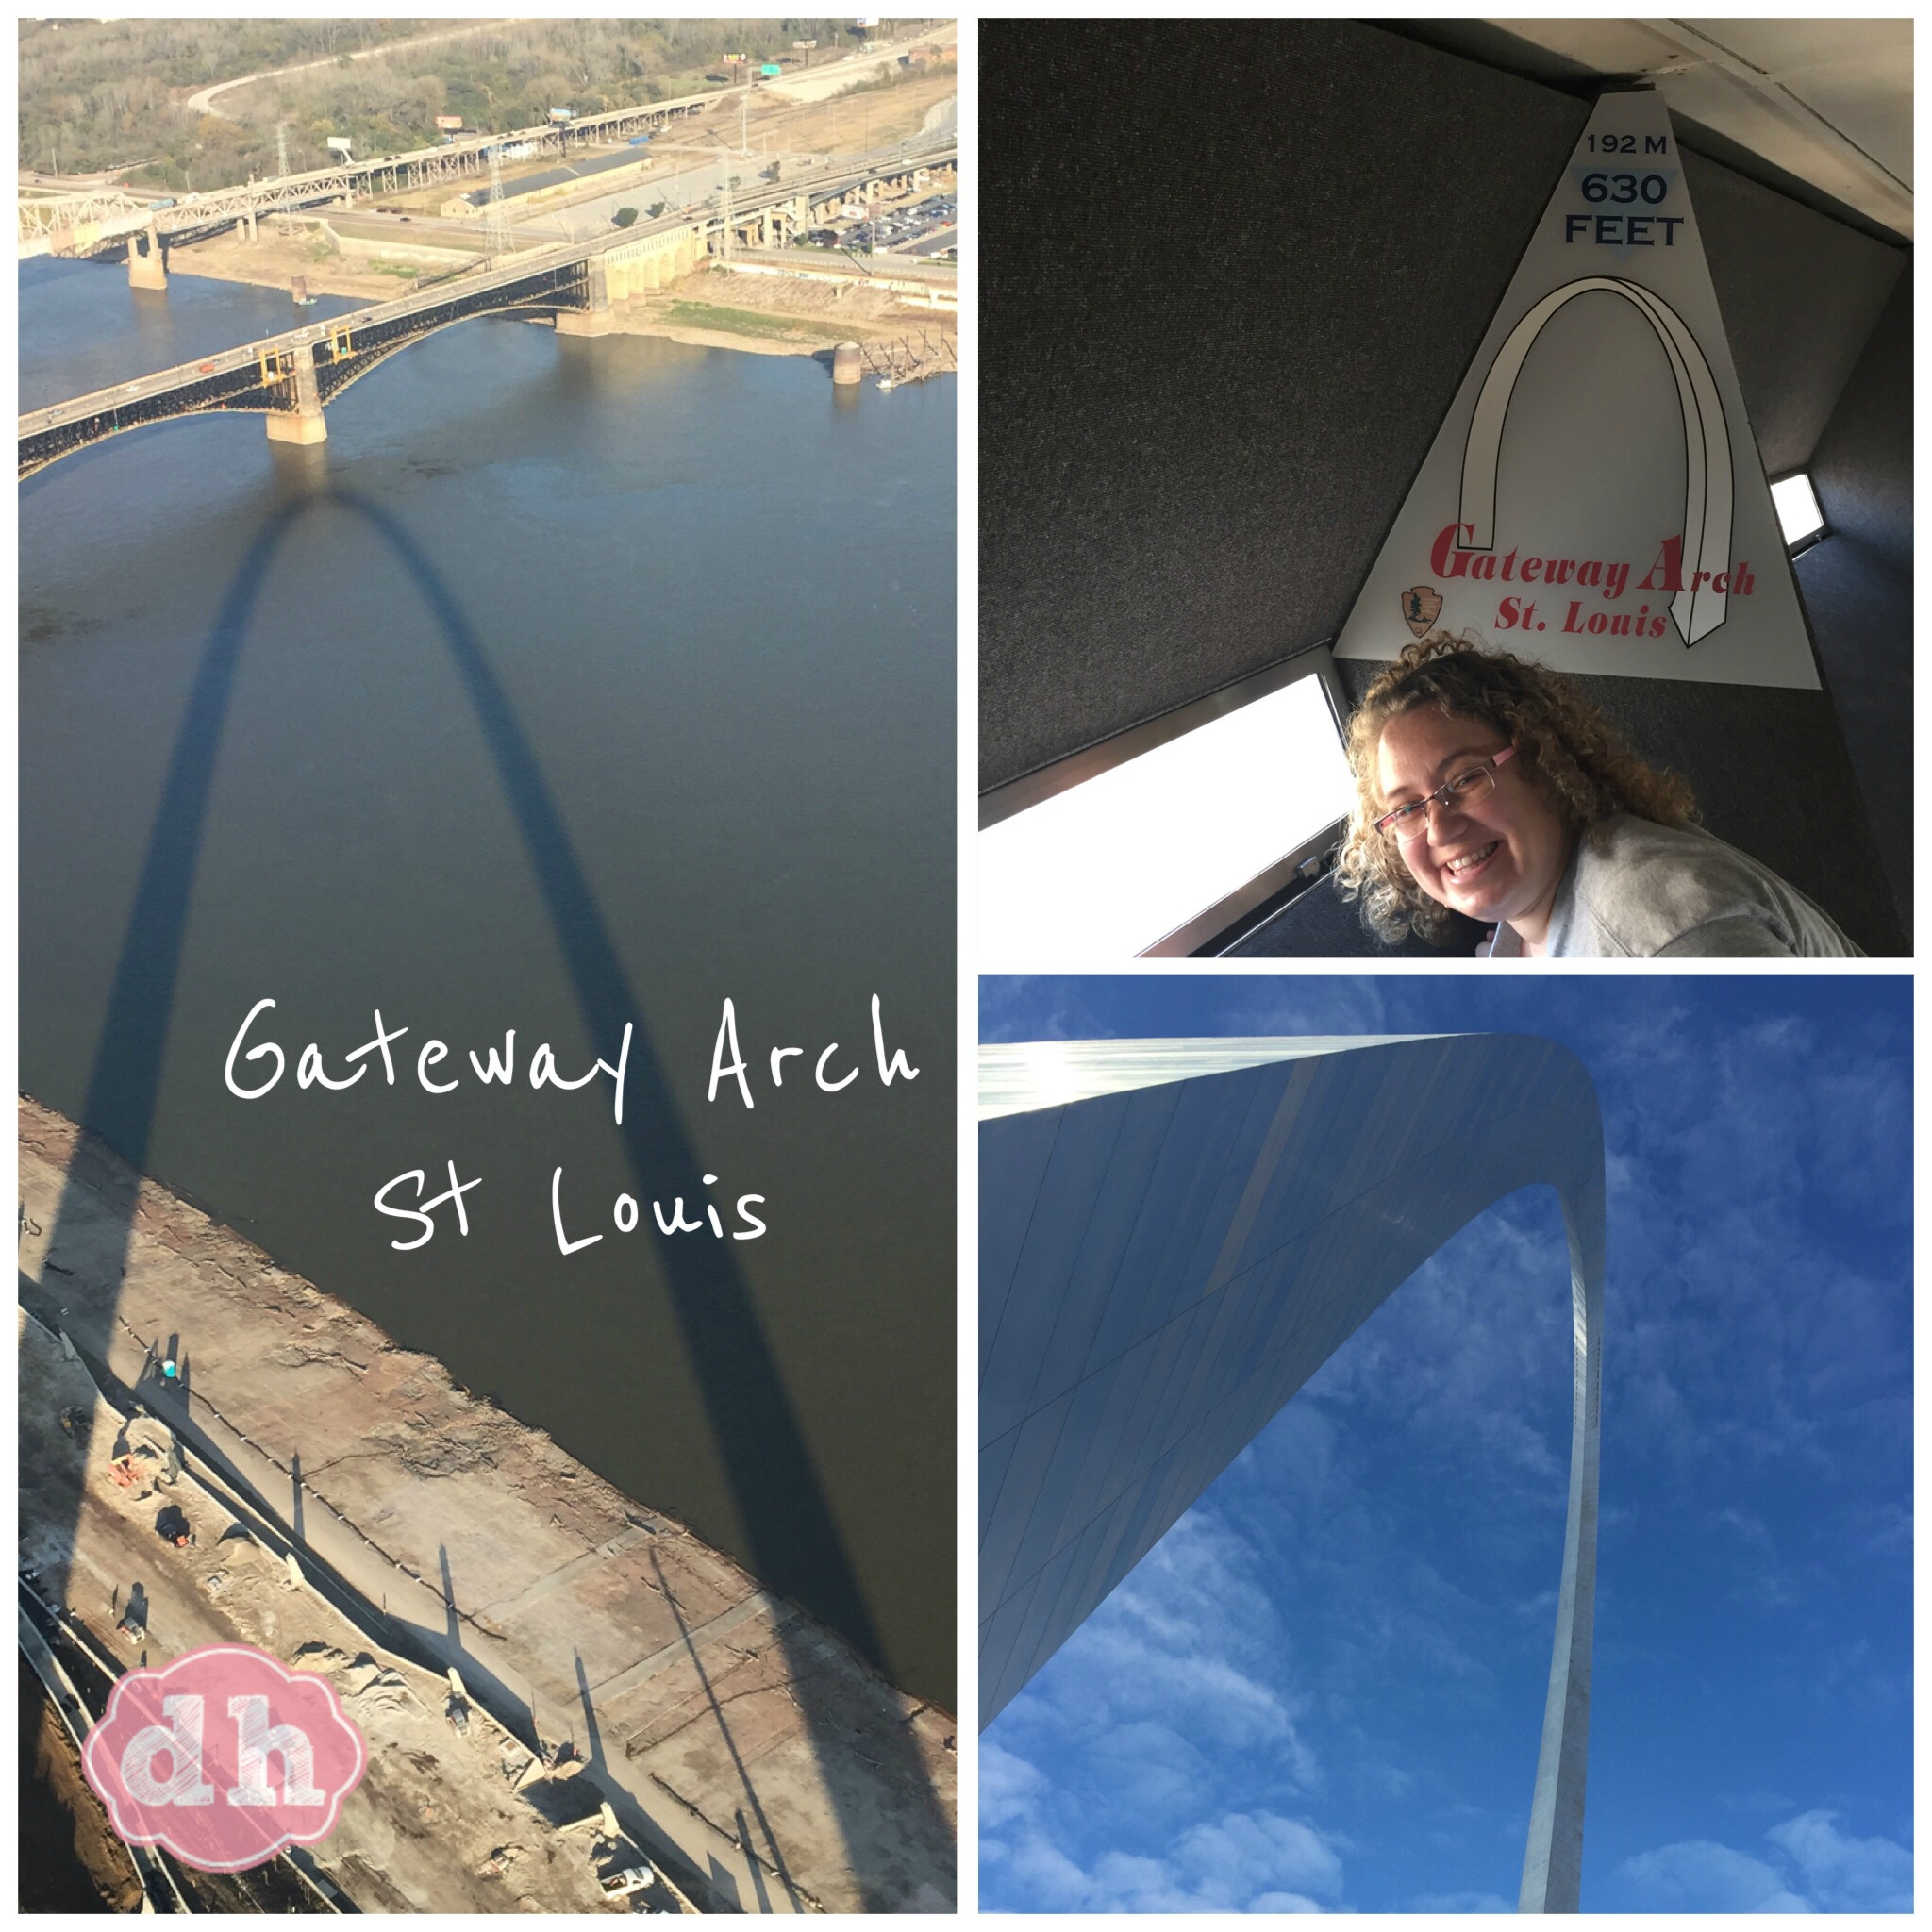 Going up in the Gateway Arch in St Louis - www.waterandnature.org